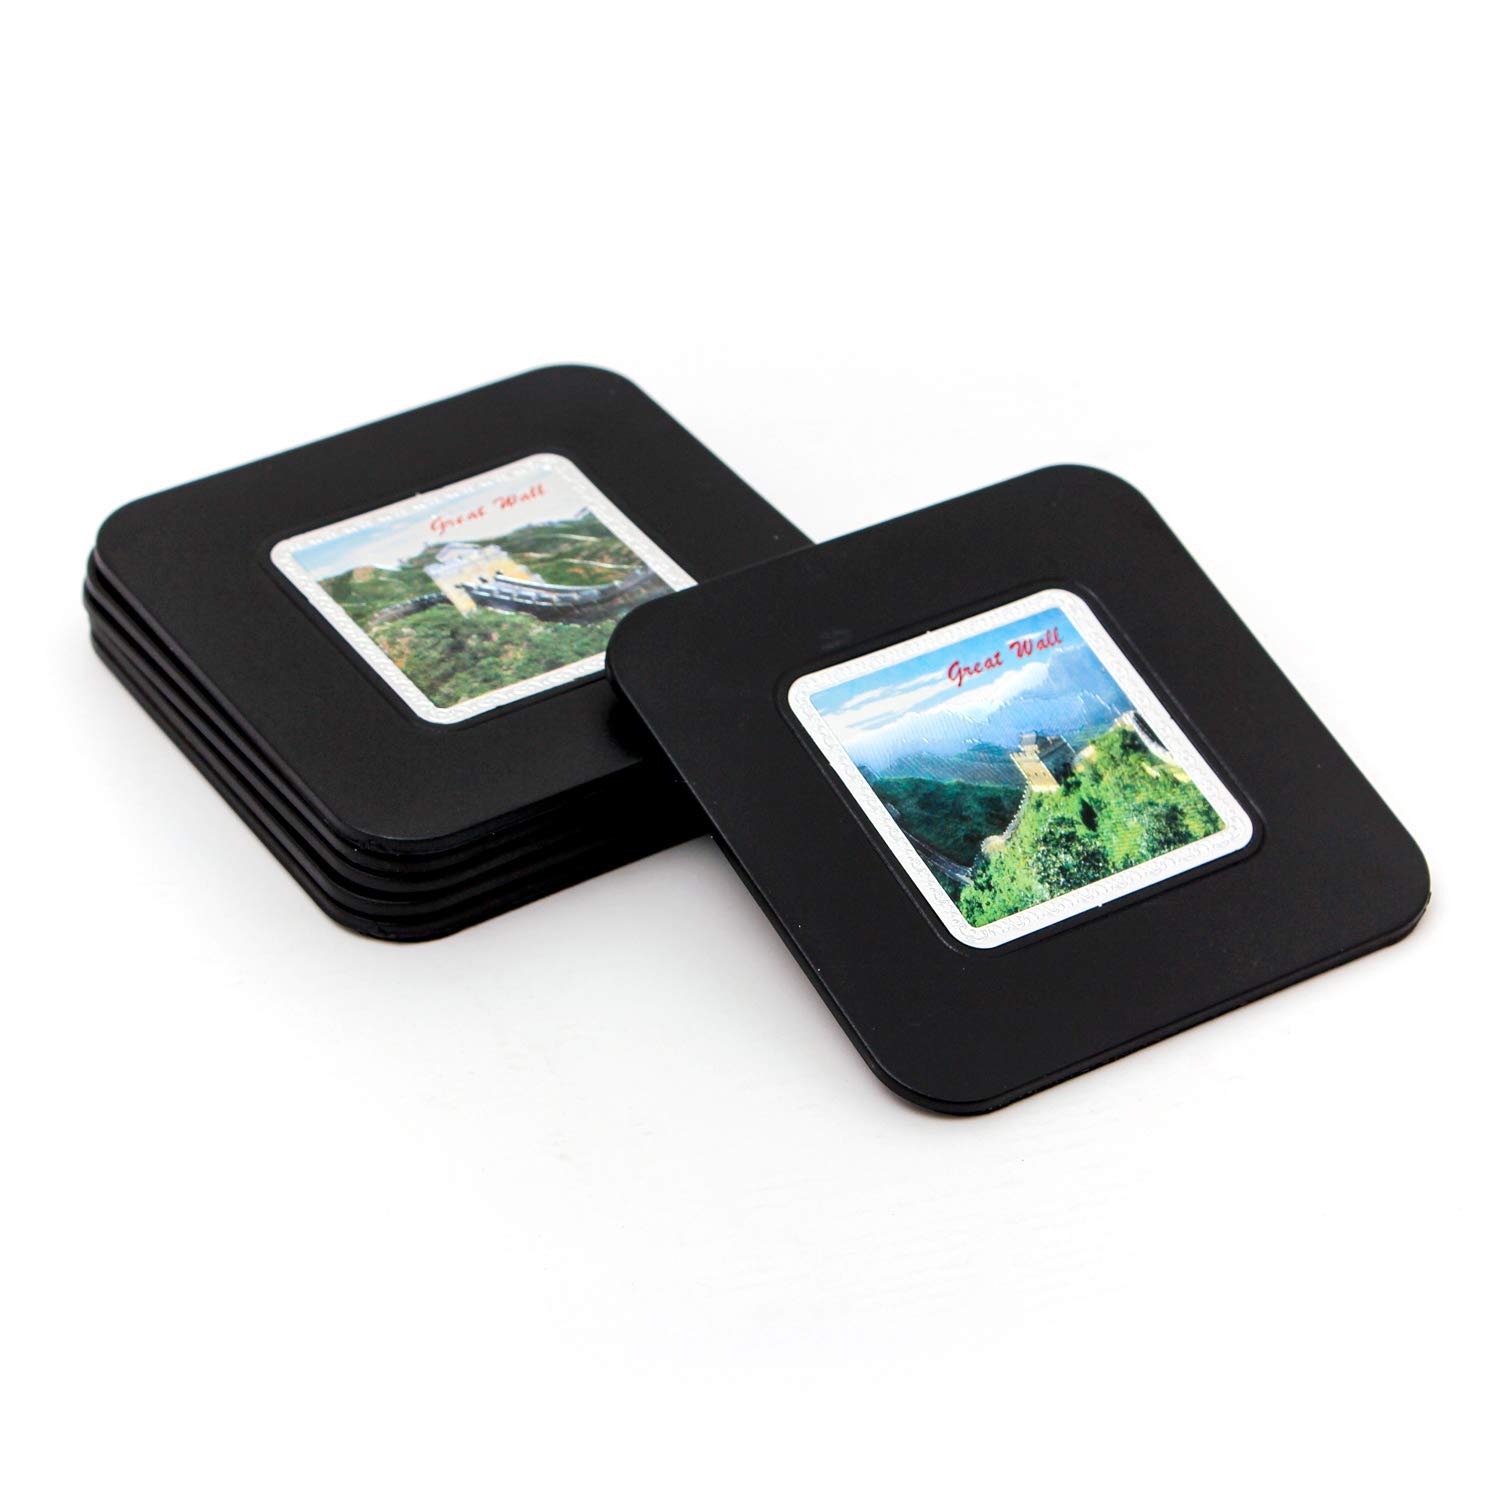 Book Cover Unique Great Wall Coasters for Drinks Anti-Skid Tabletop Drink Coasters Easy To Clean Anti-Scratch Home Drinks Mat, Saucers for Cold Drinks, Living Room Decor, Set of 6【Dea1 50% 0ff】